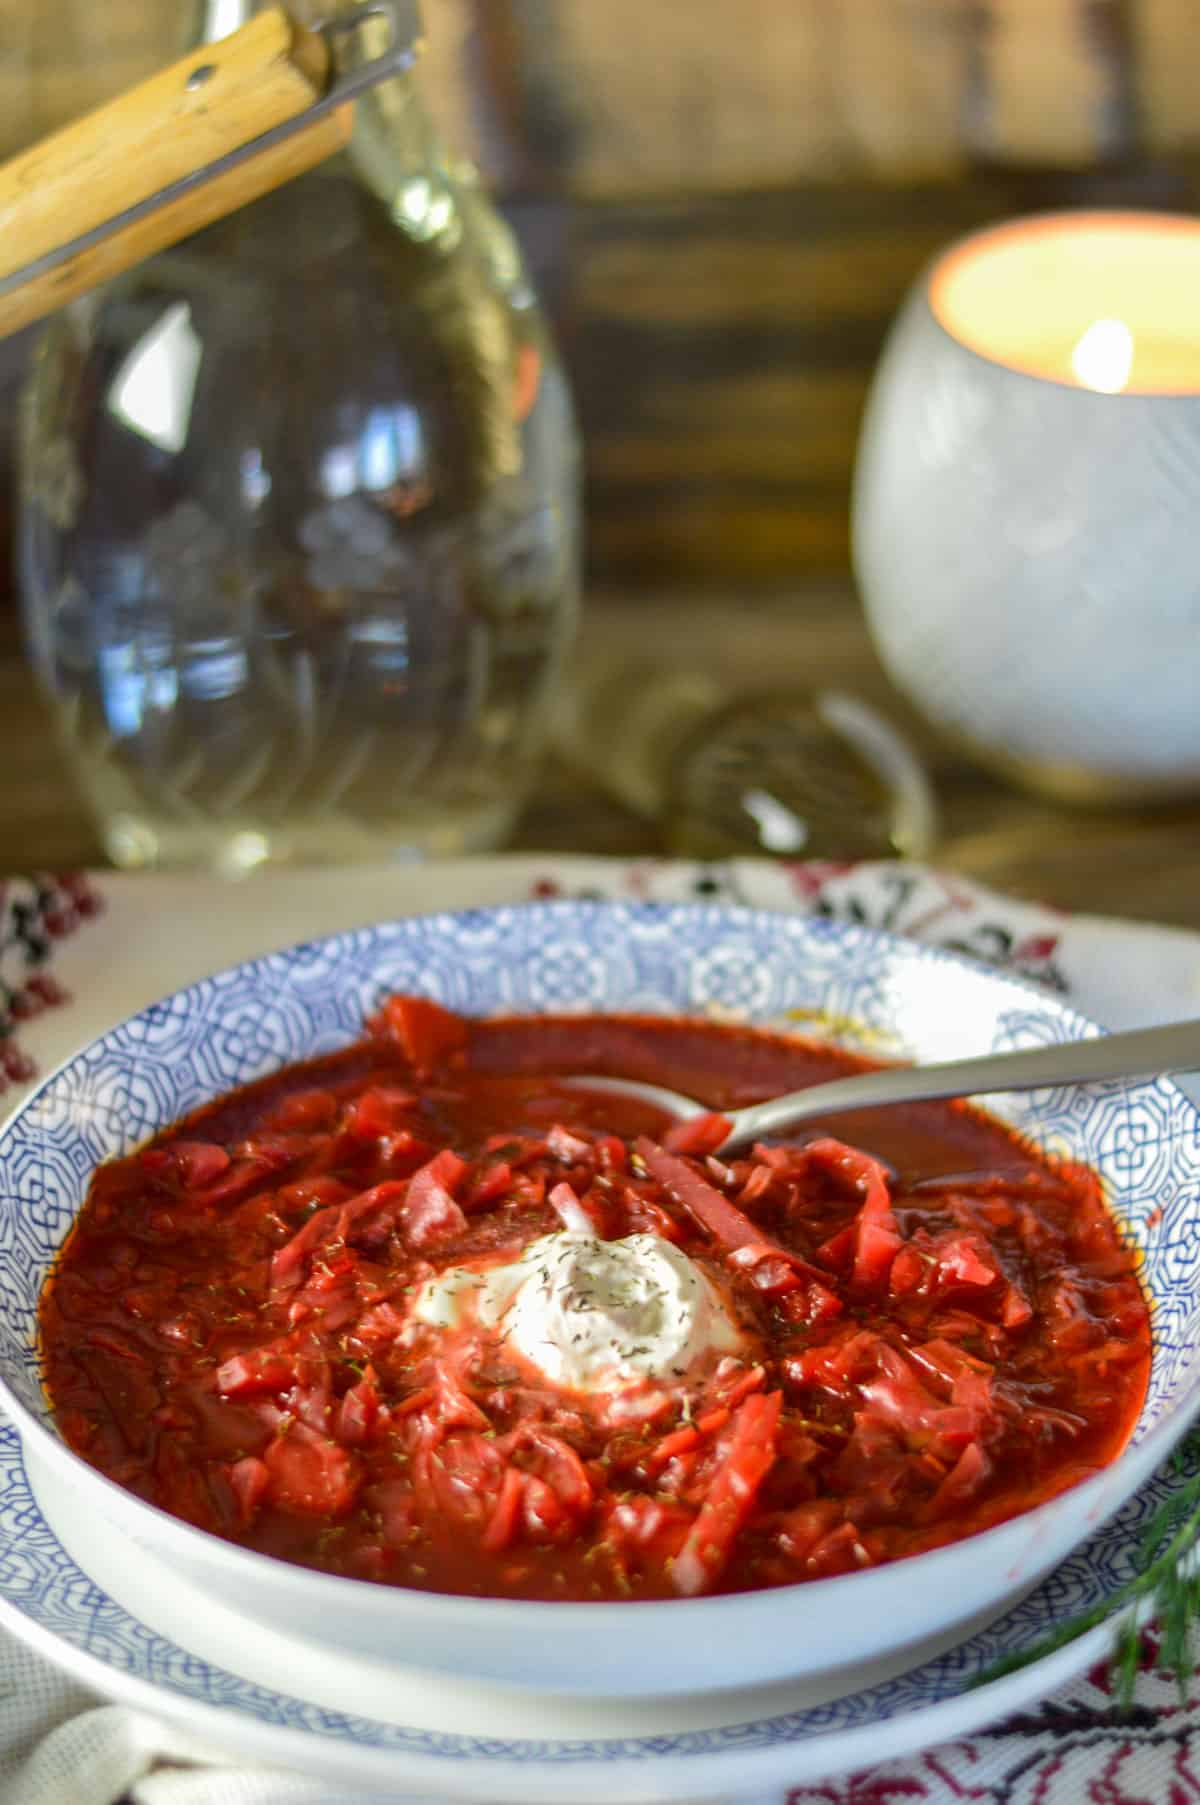 Red borscht in bowl with spoon, sour cream and dill. Glass bottle and candle in background with Ukrainian napkin